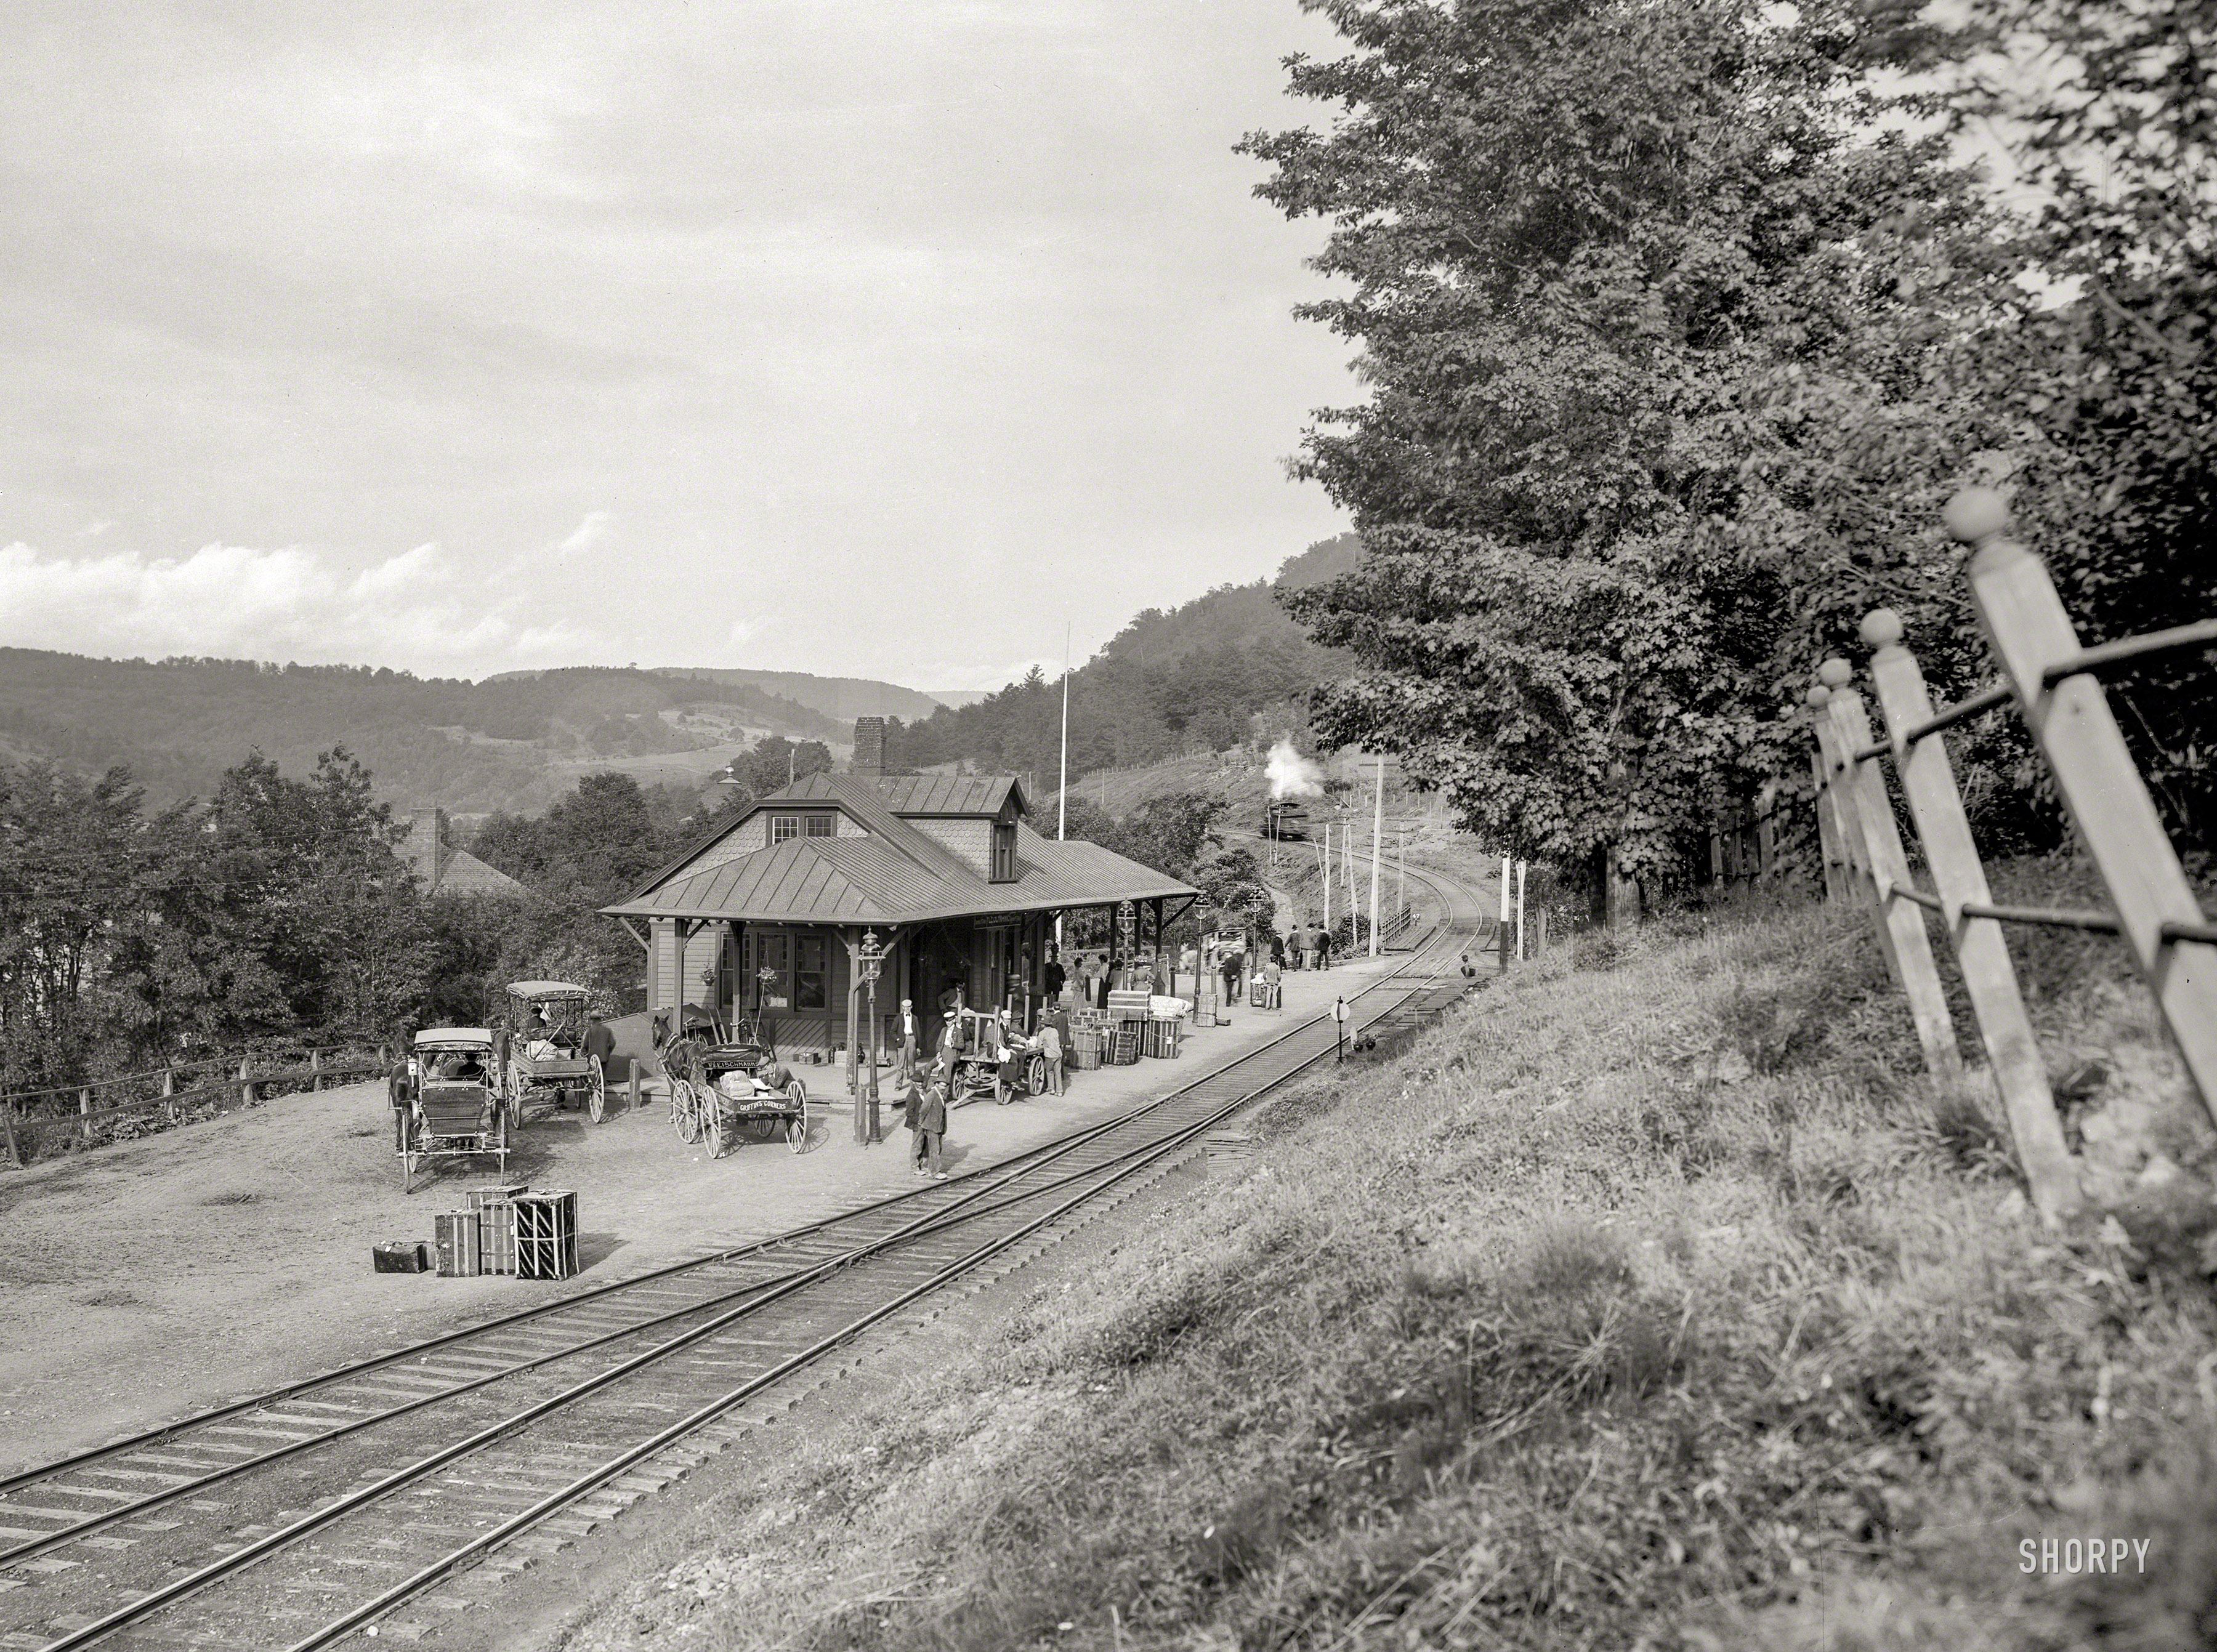 Delaware County, New York, circa 1902. "Ulster & Delaware R.R. station, Fleischmanns, Catskill Mountains." Somewhere between Pixley and Willoughby. 8x10 inch dry plate glass negative, Detroit Publishing Company. View full size.